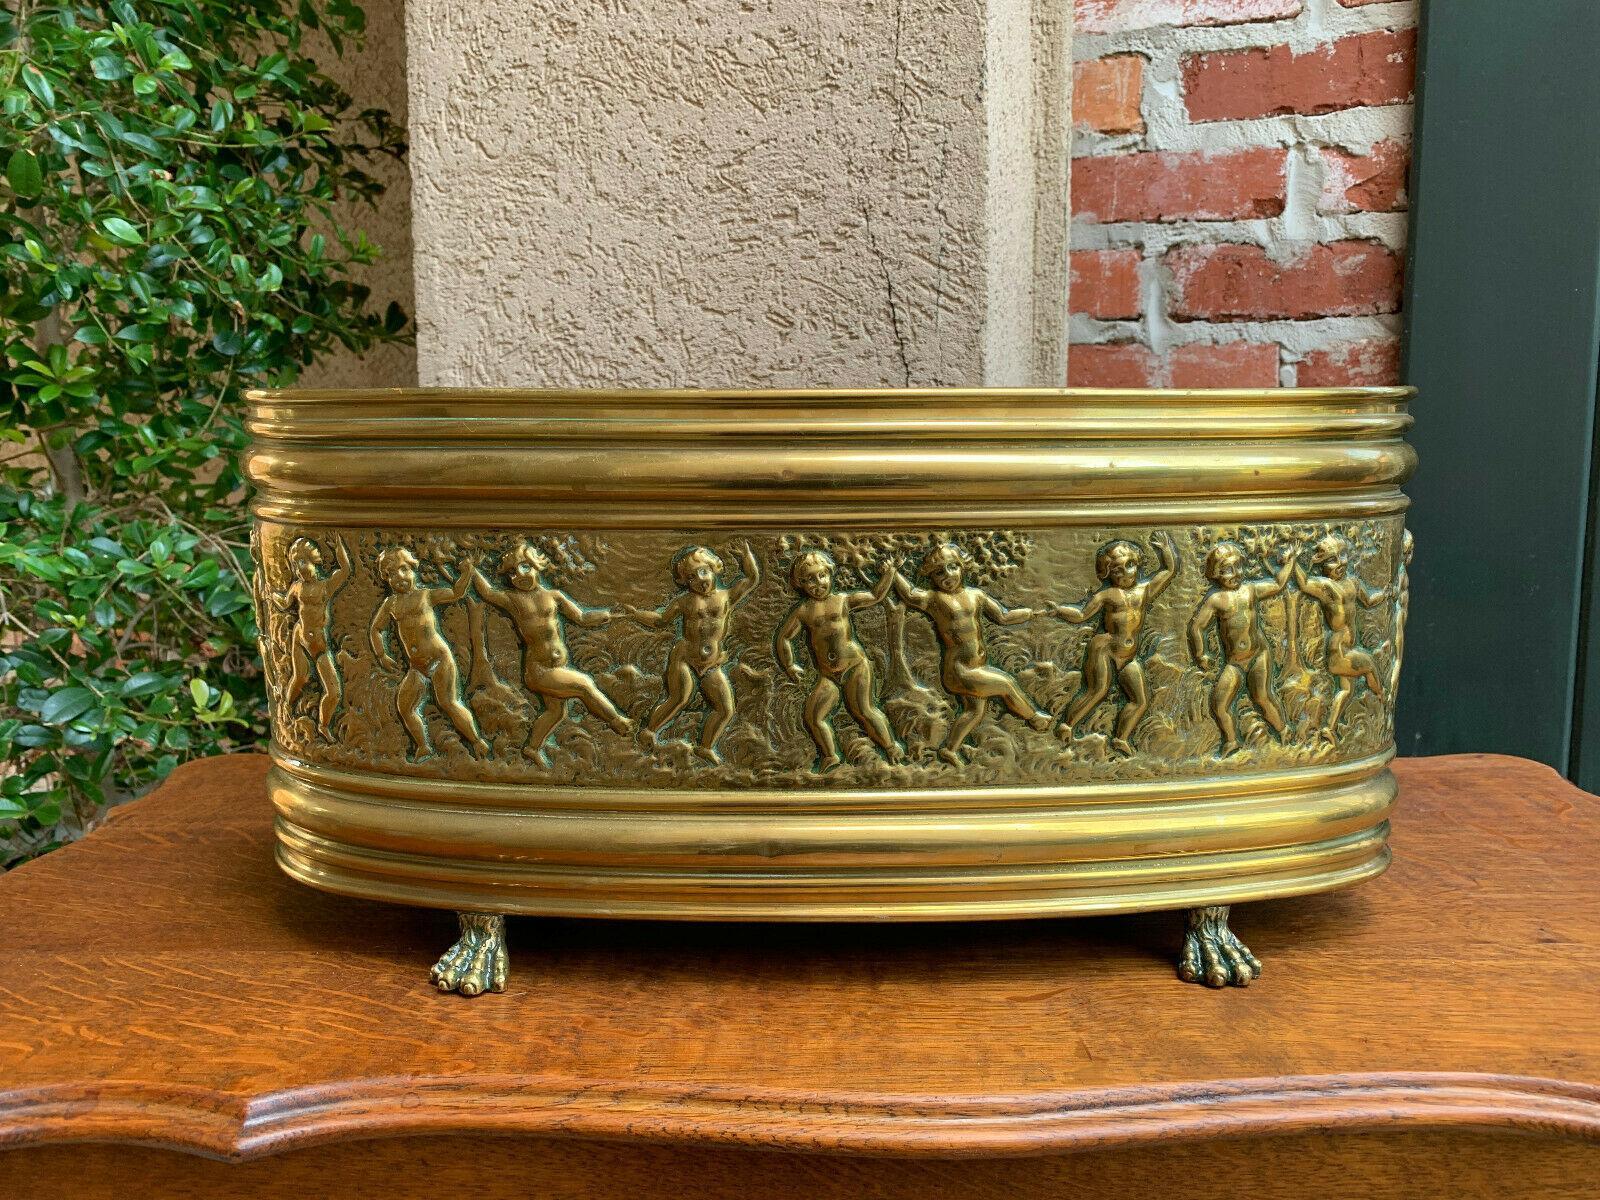 ~Direct from France~
~Lovely antique embossed brass French jardinière~
~Stunning, huge band of dancing cherubs amid trees, around the entire oval shape, set up on four brass ‘paw feet’~
~circa 1900~

Measurements
8.5” height x 18.5” x